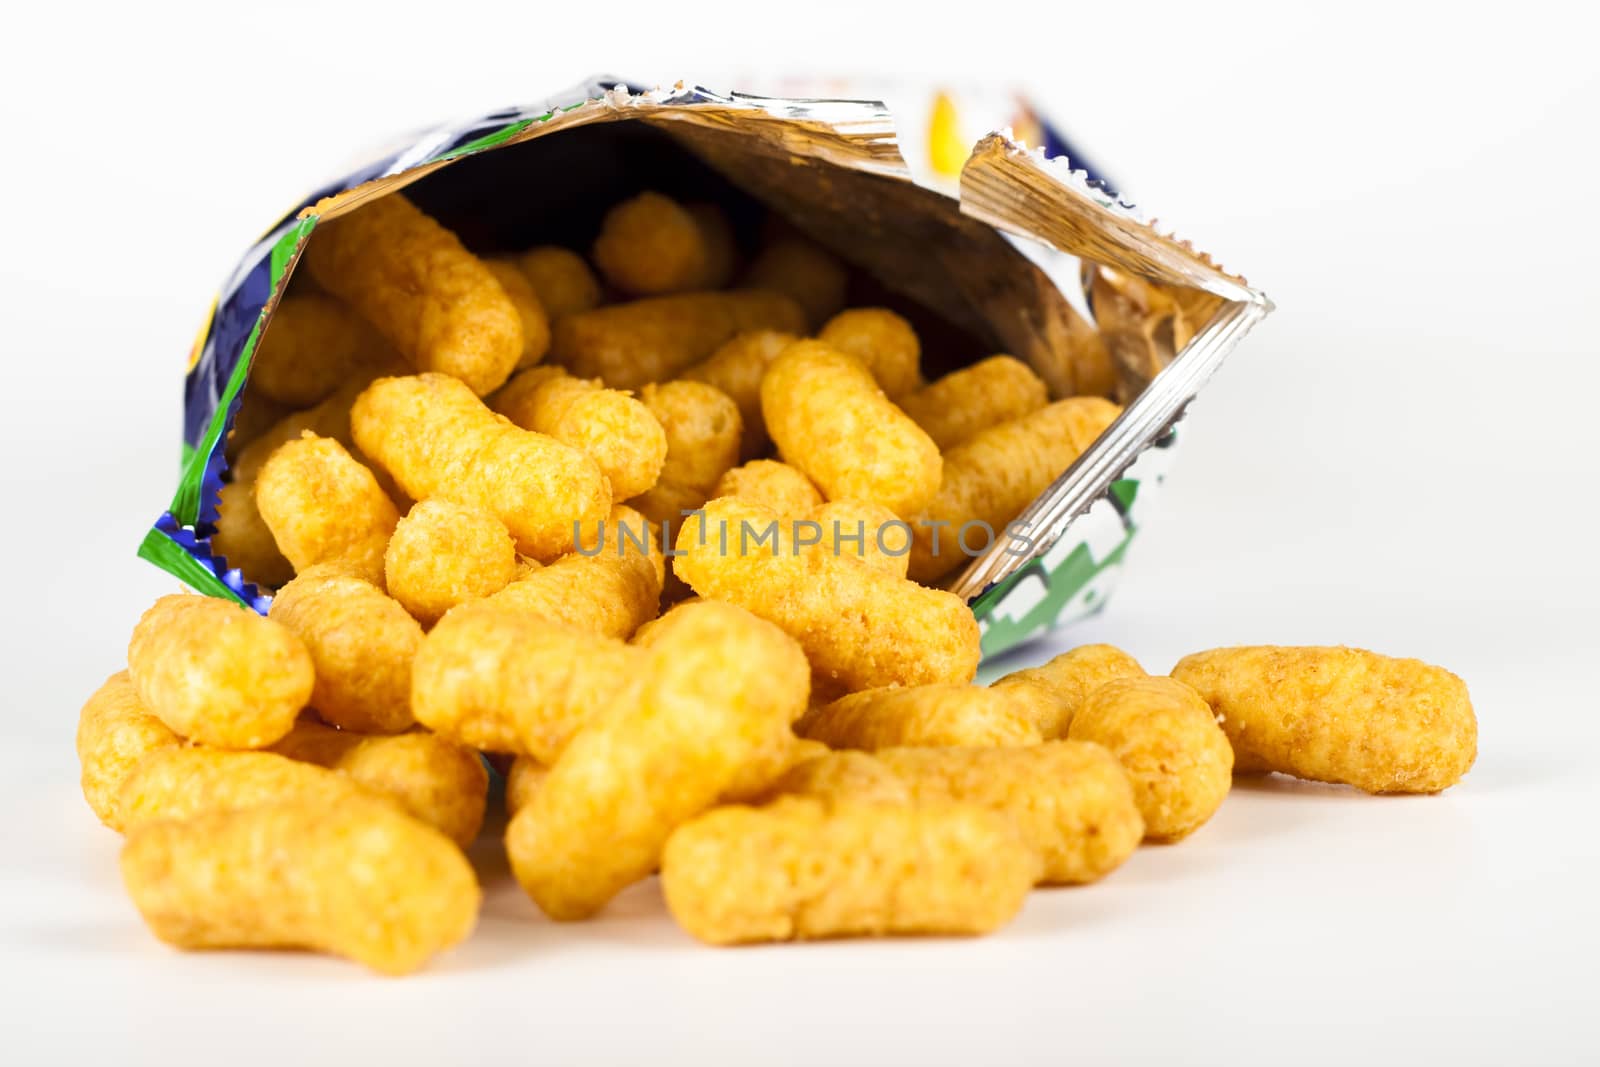 bamba unhealthy snacks out of the bag on white background